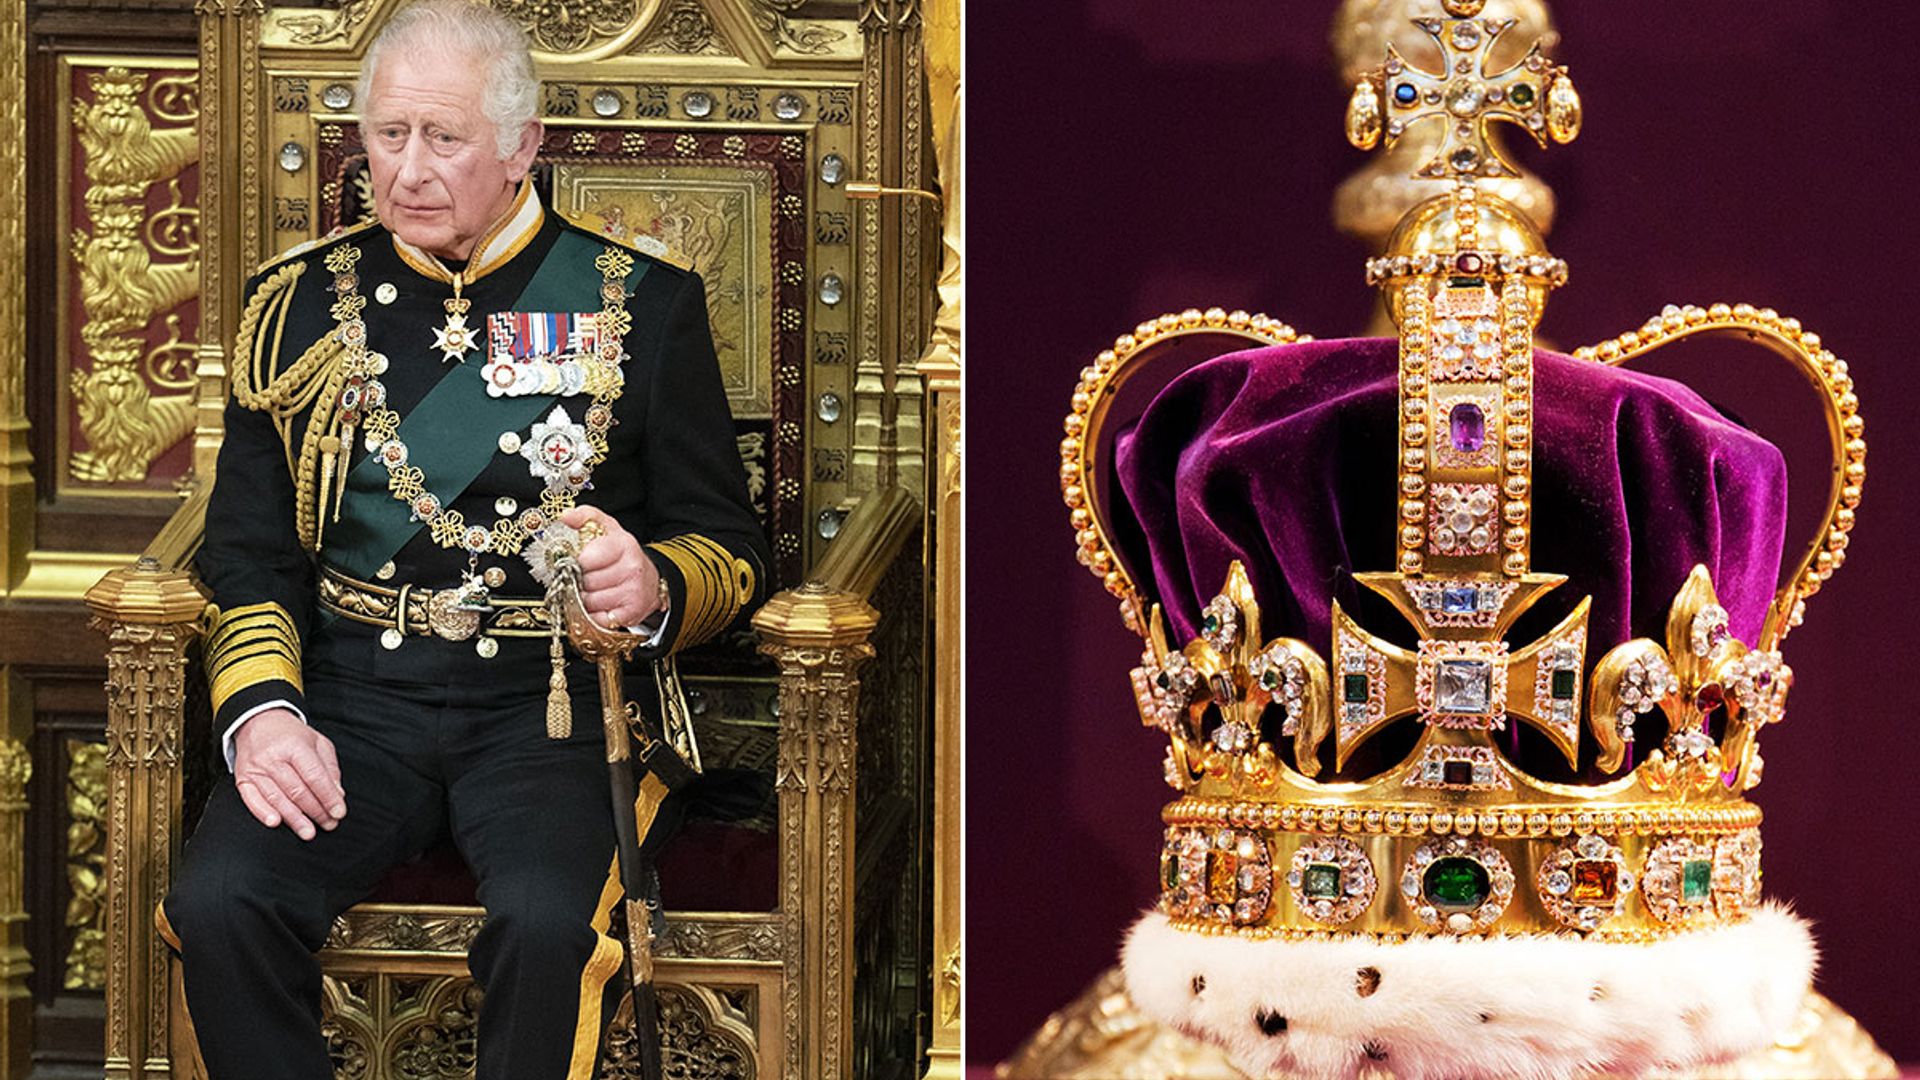 All you need to know about St Edward's Crown ahead of King Charles III's coronation